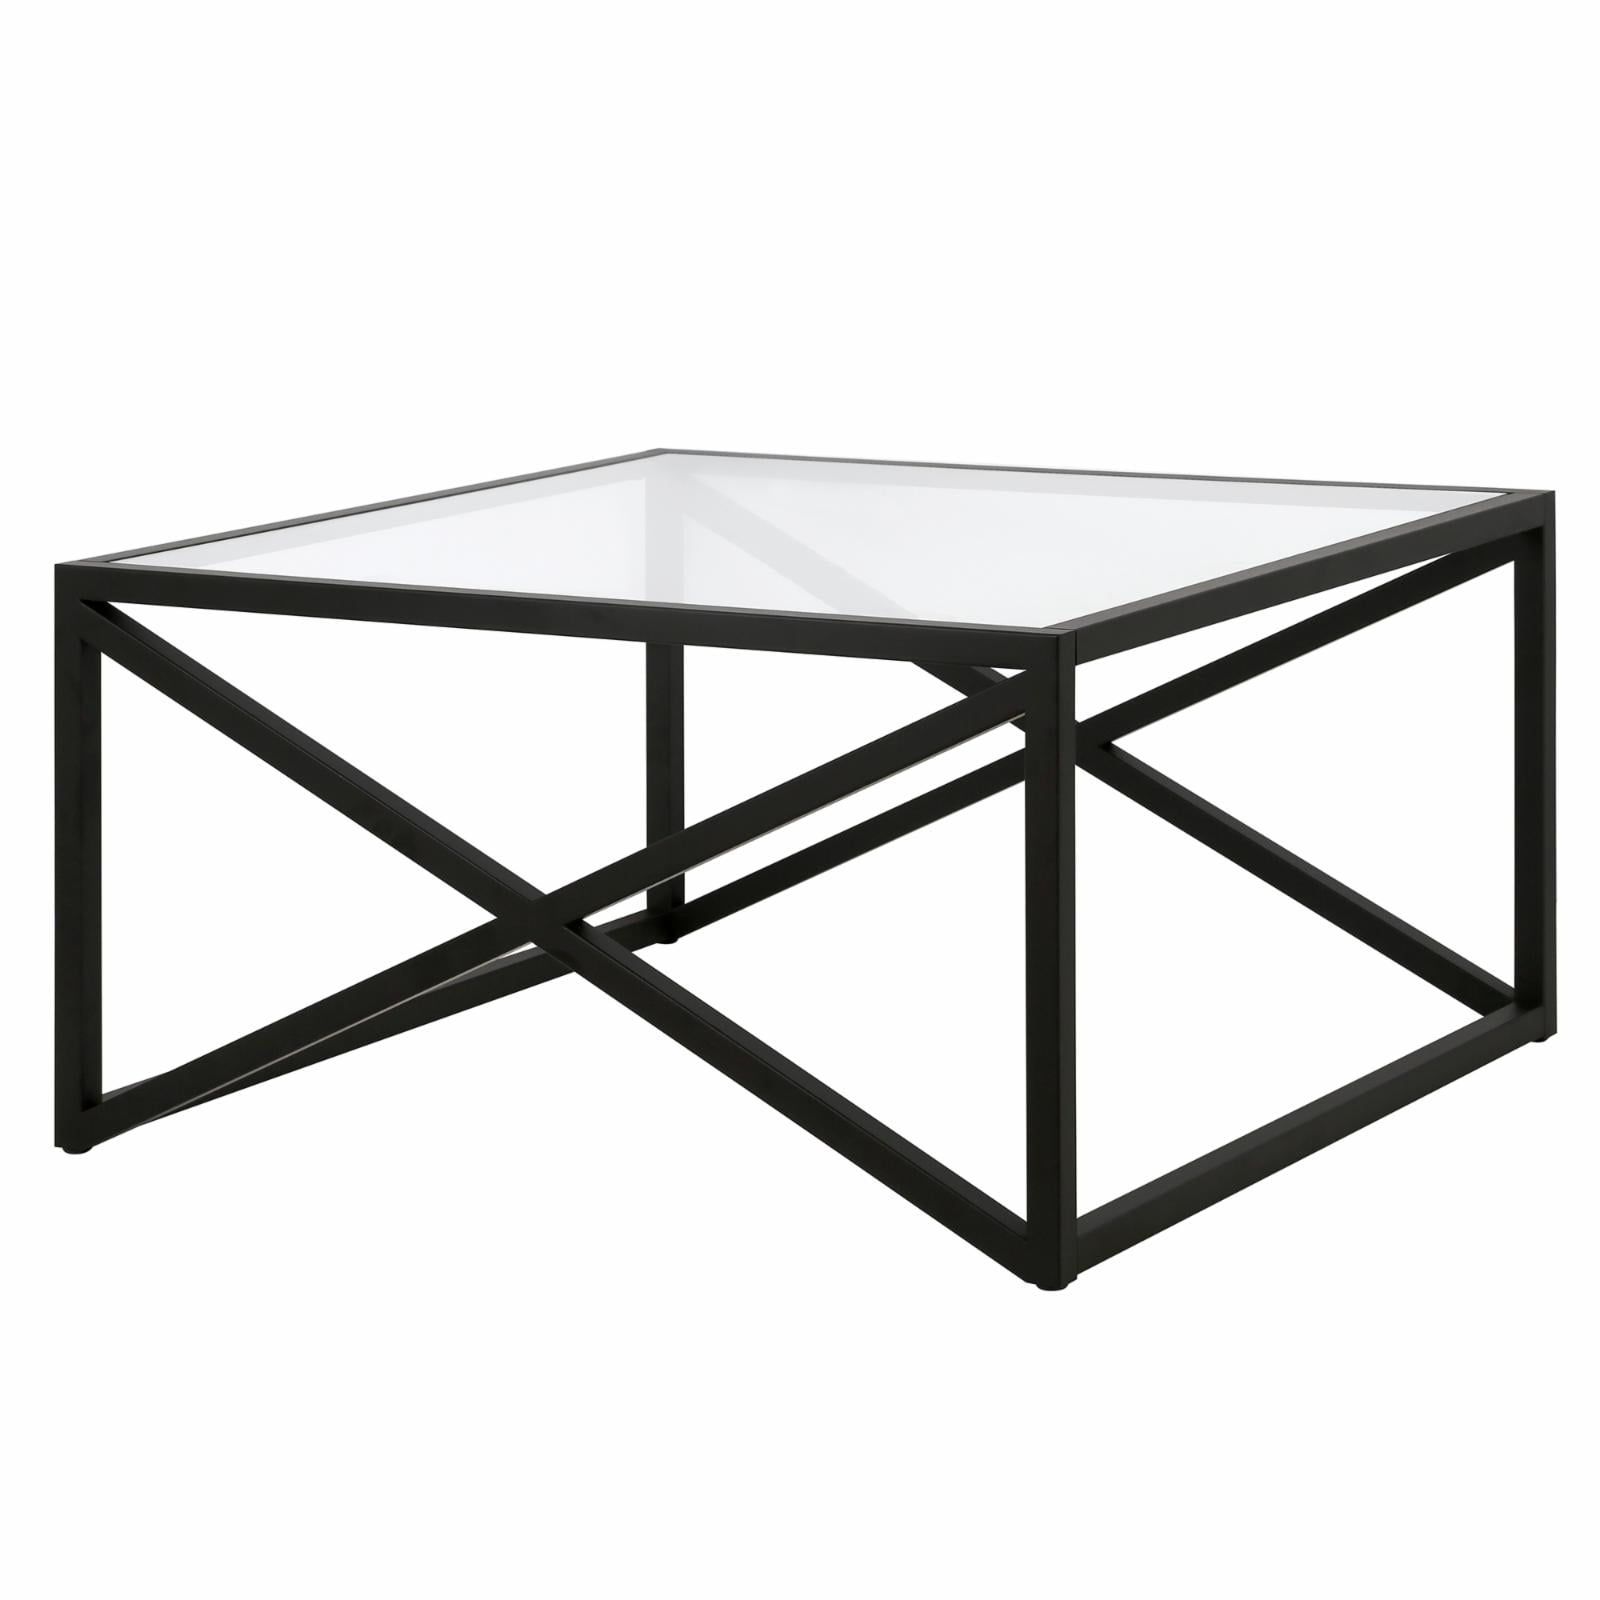 Featured Photo of The 20 Best Collection of Addison&lane Calix Square Tables